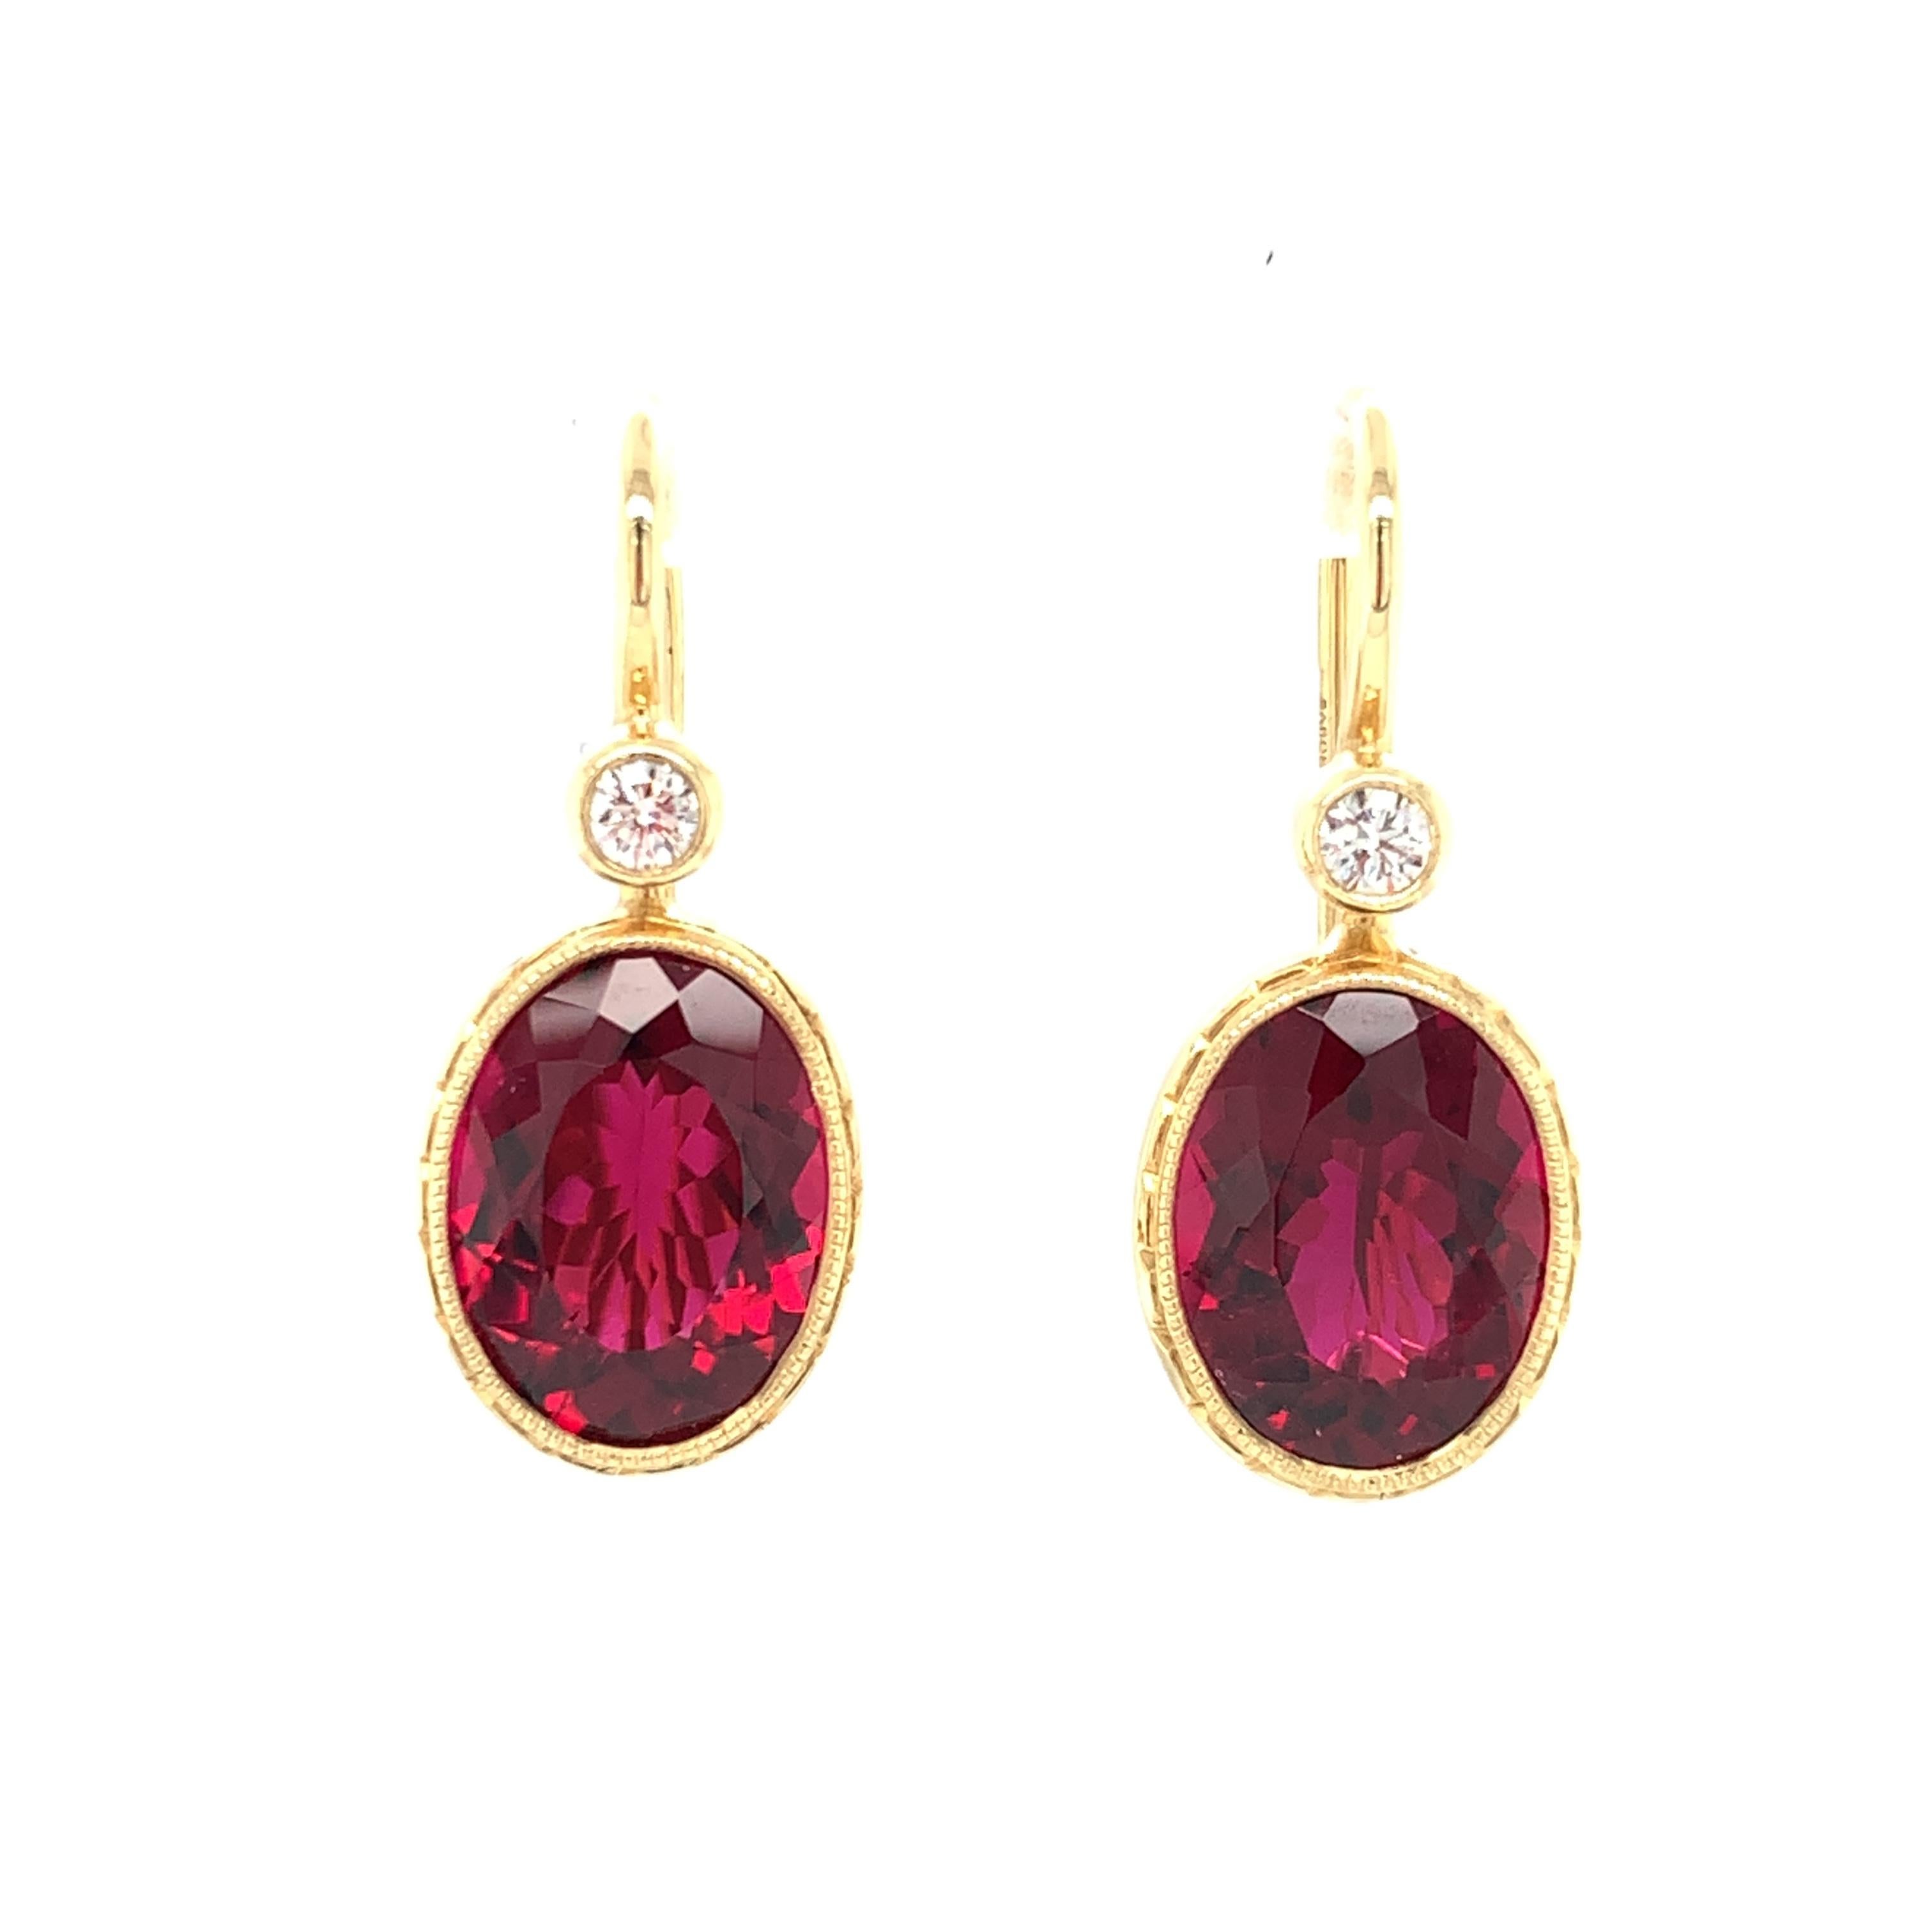 It is rare to see earrings made from such large colored gems. Why? Because matched pairs of gem quality colored stones are exceedingly hard to come by. Usually, gem quality stones of the calibre used in these earrings are only found as single stones